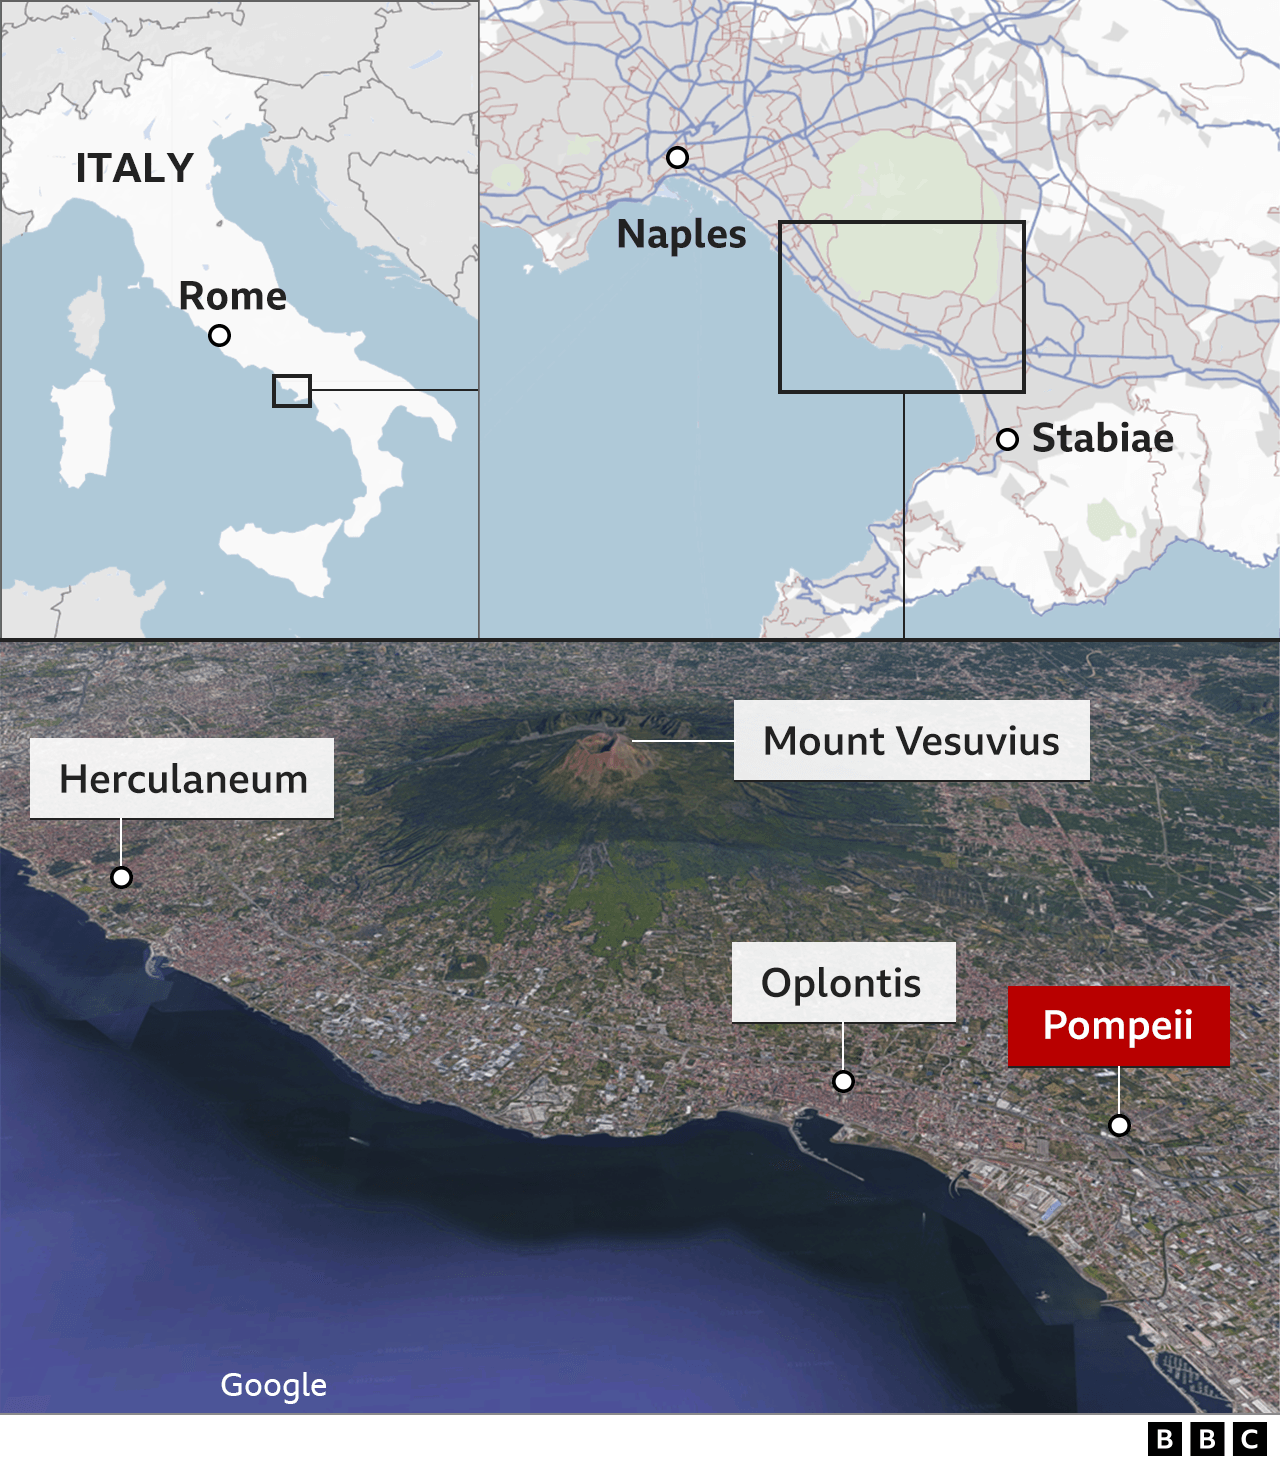 Map locating Pompeii near Naples in the south of Italy